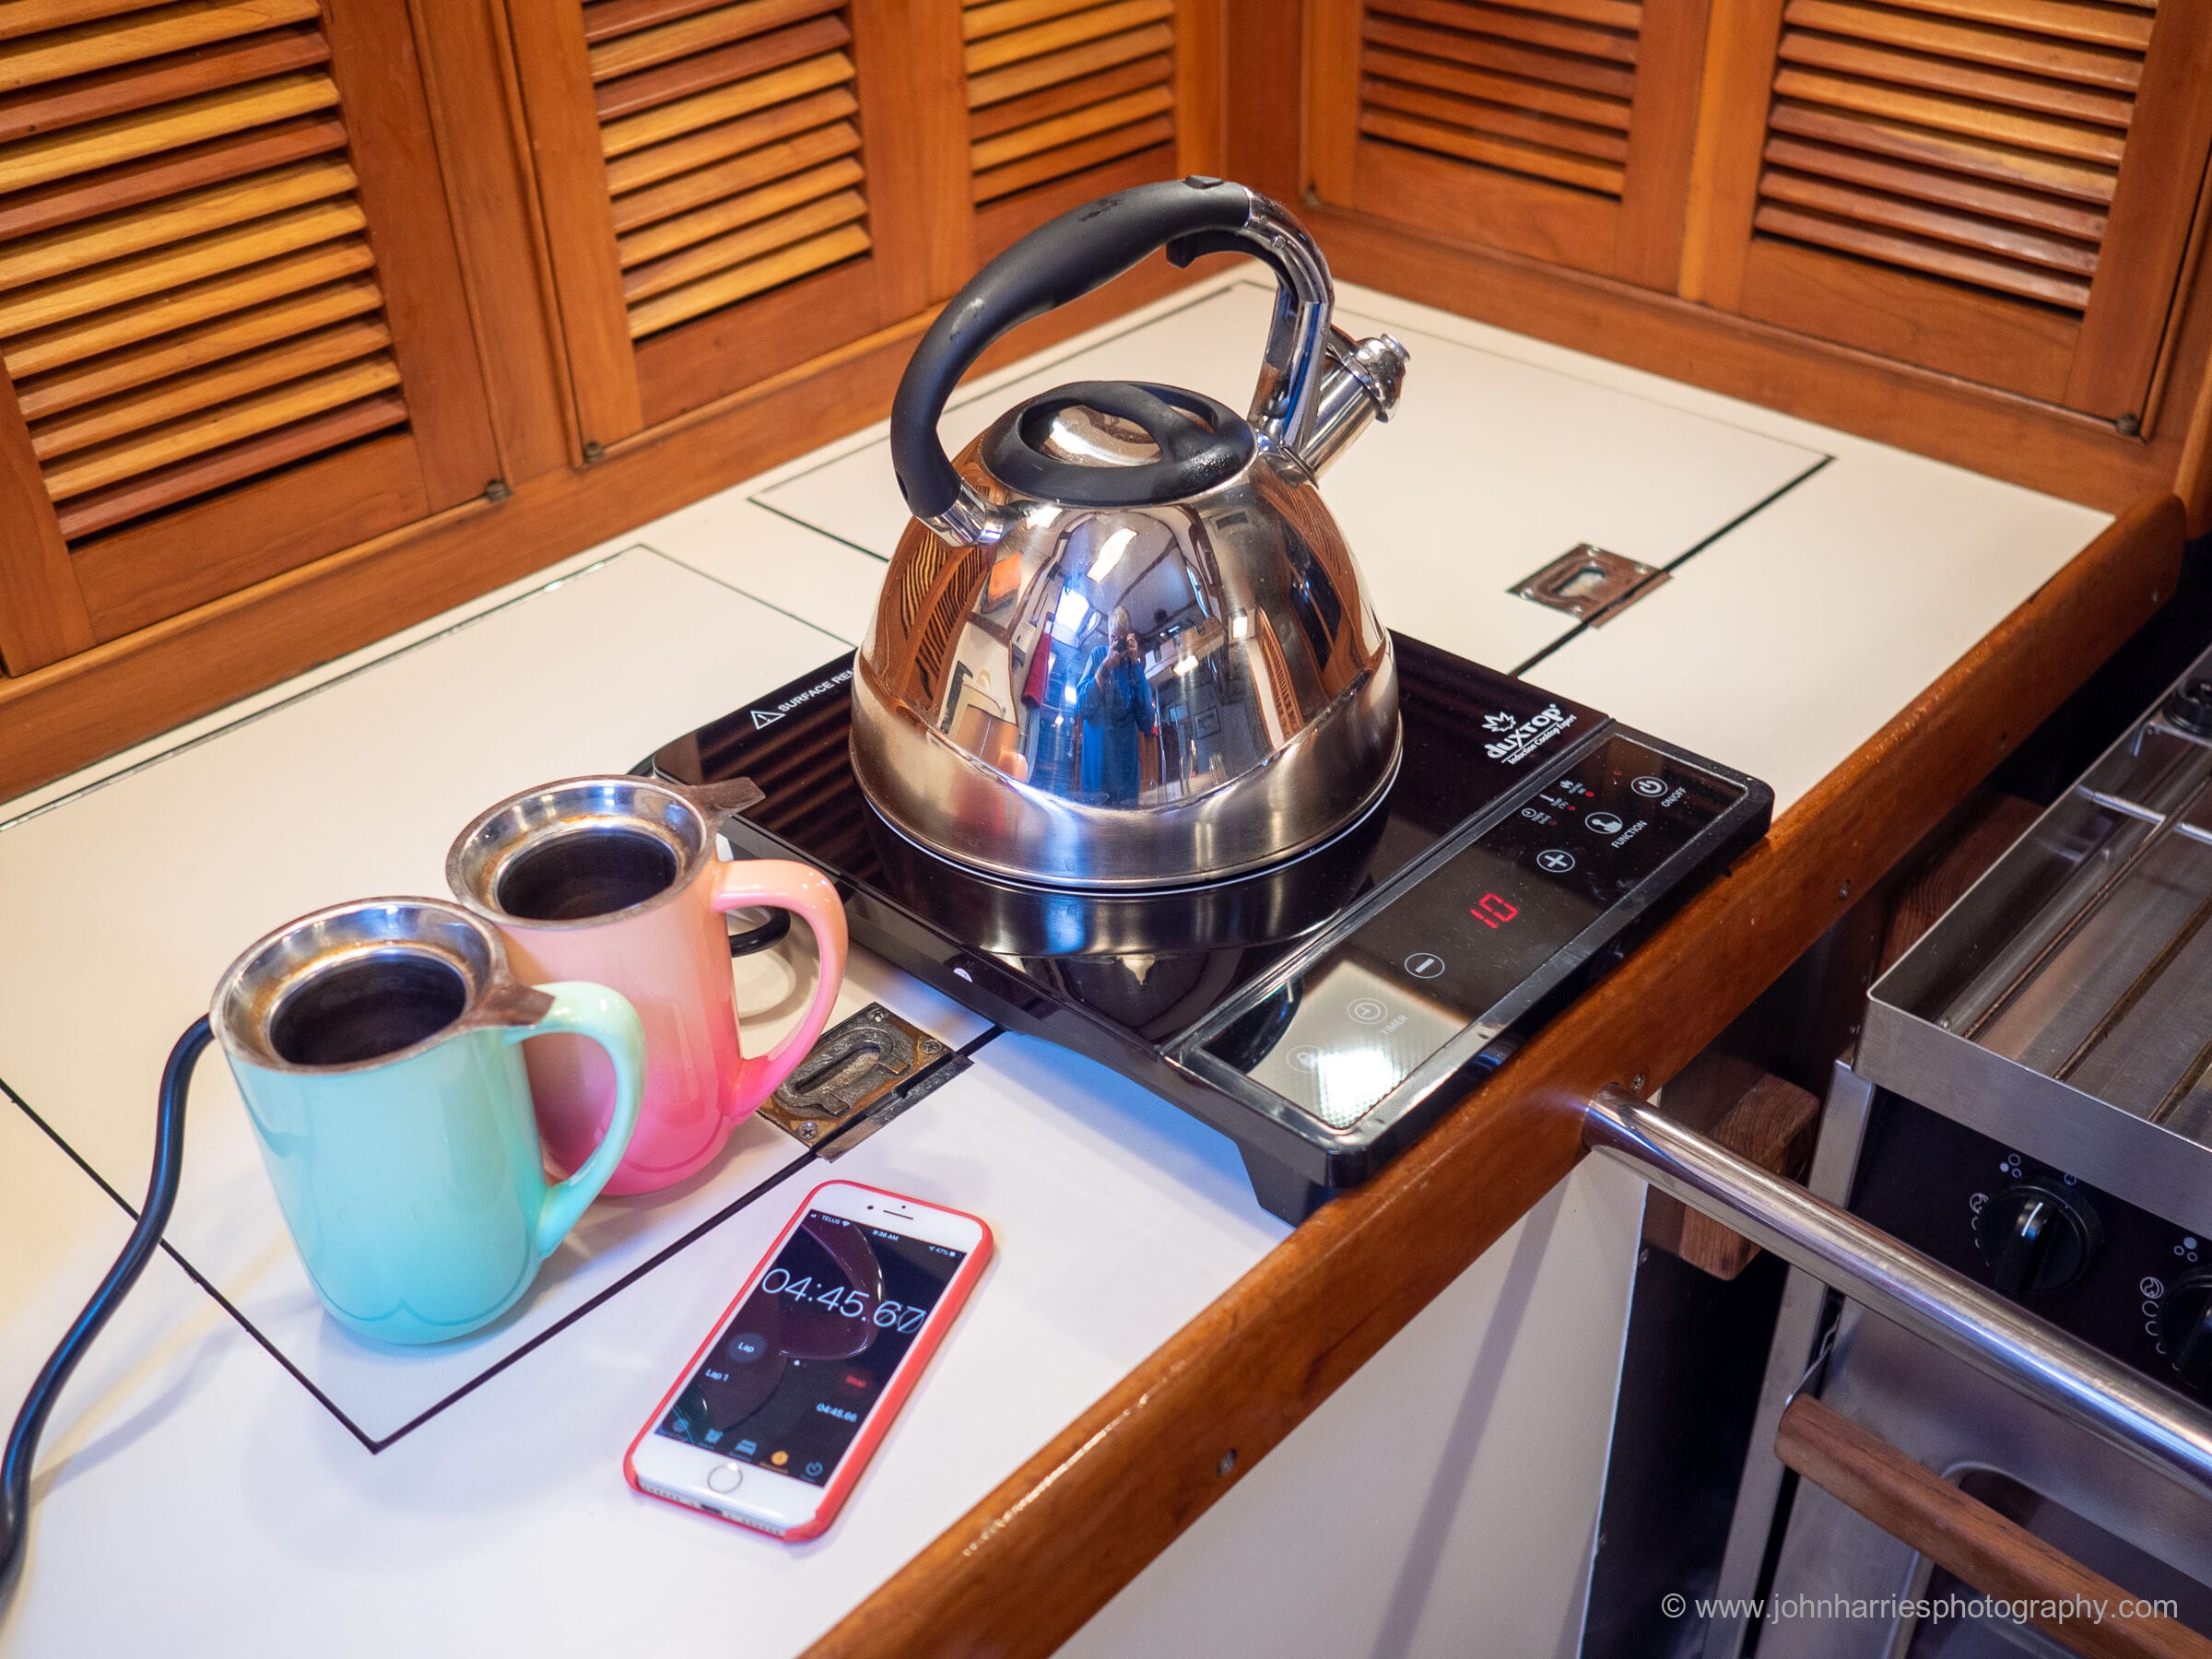 Is Induction Cooking For Boats Practical?